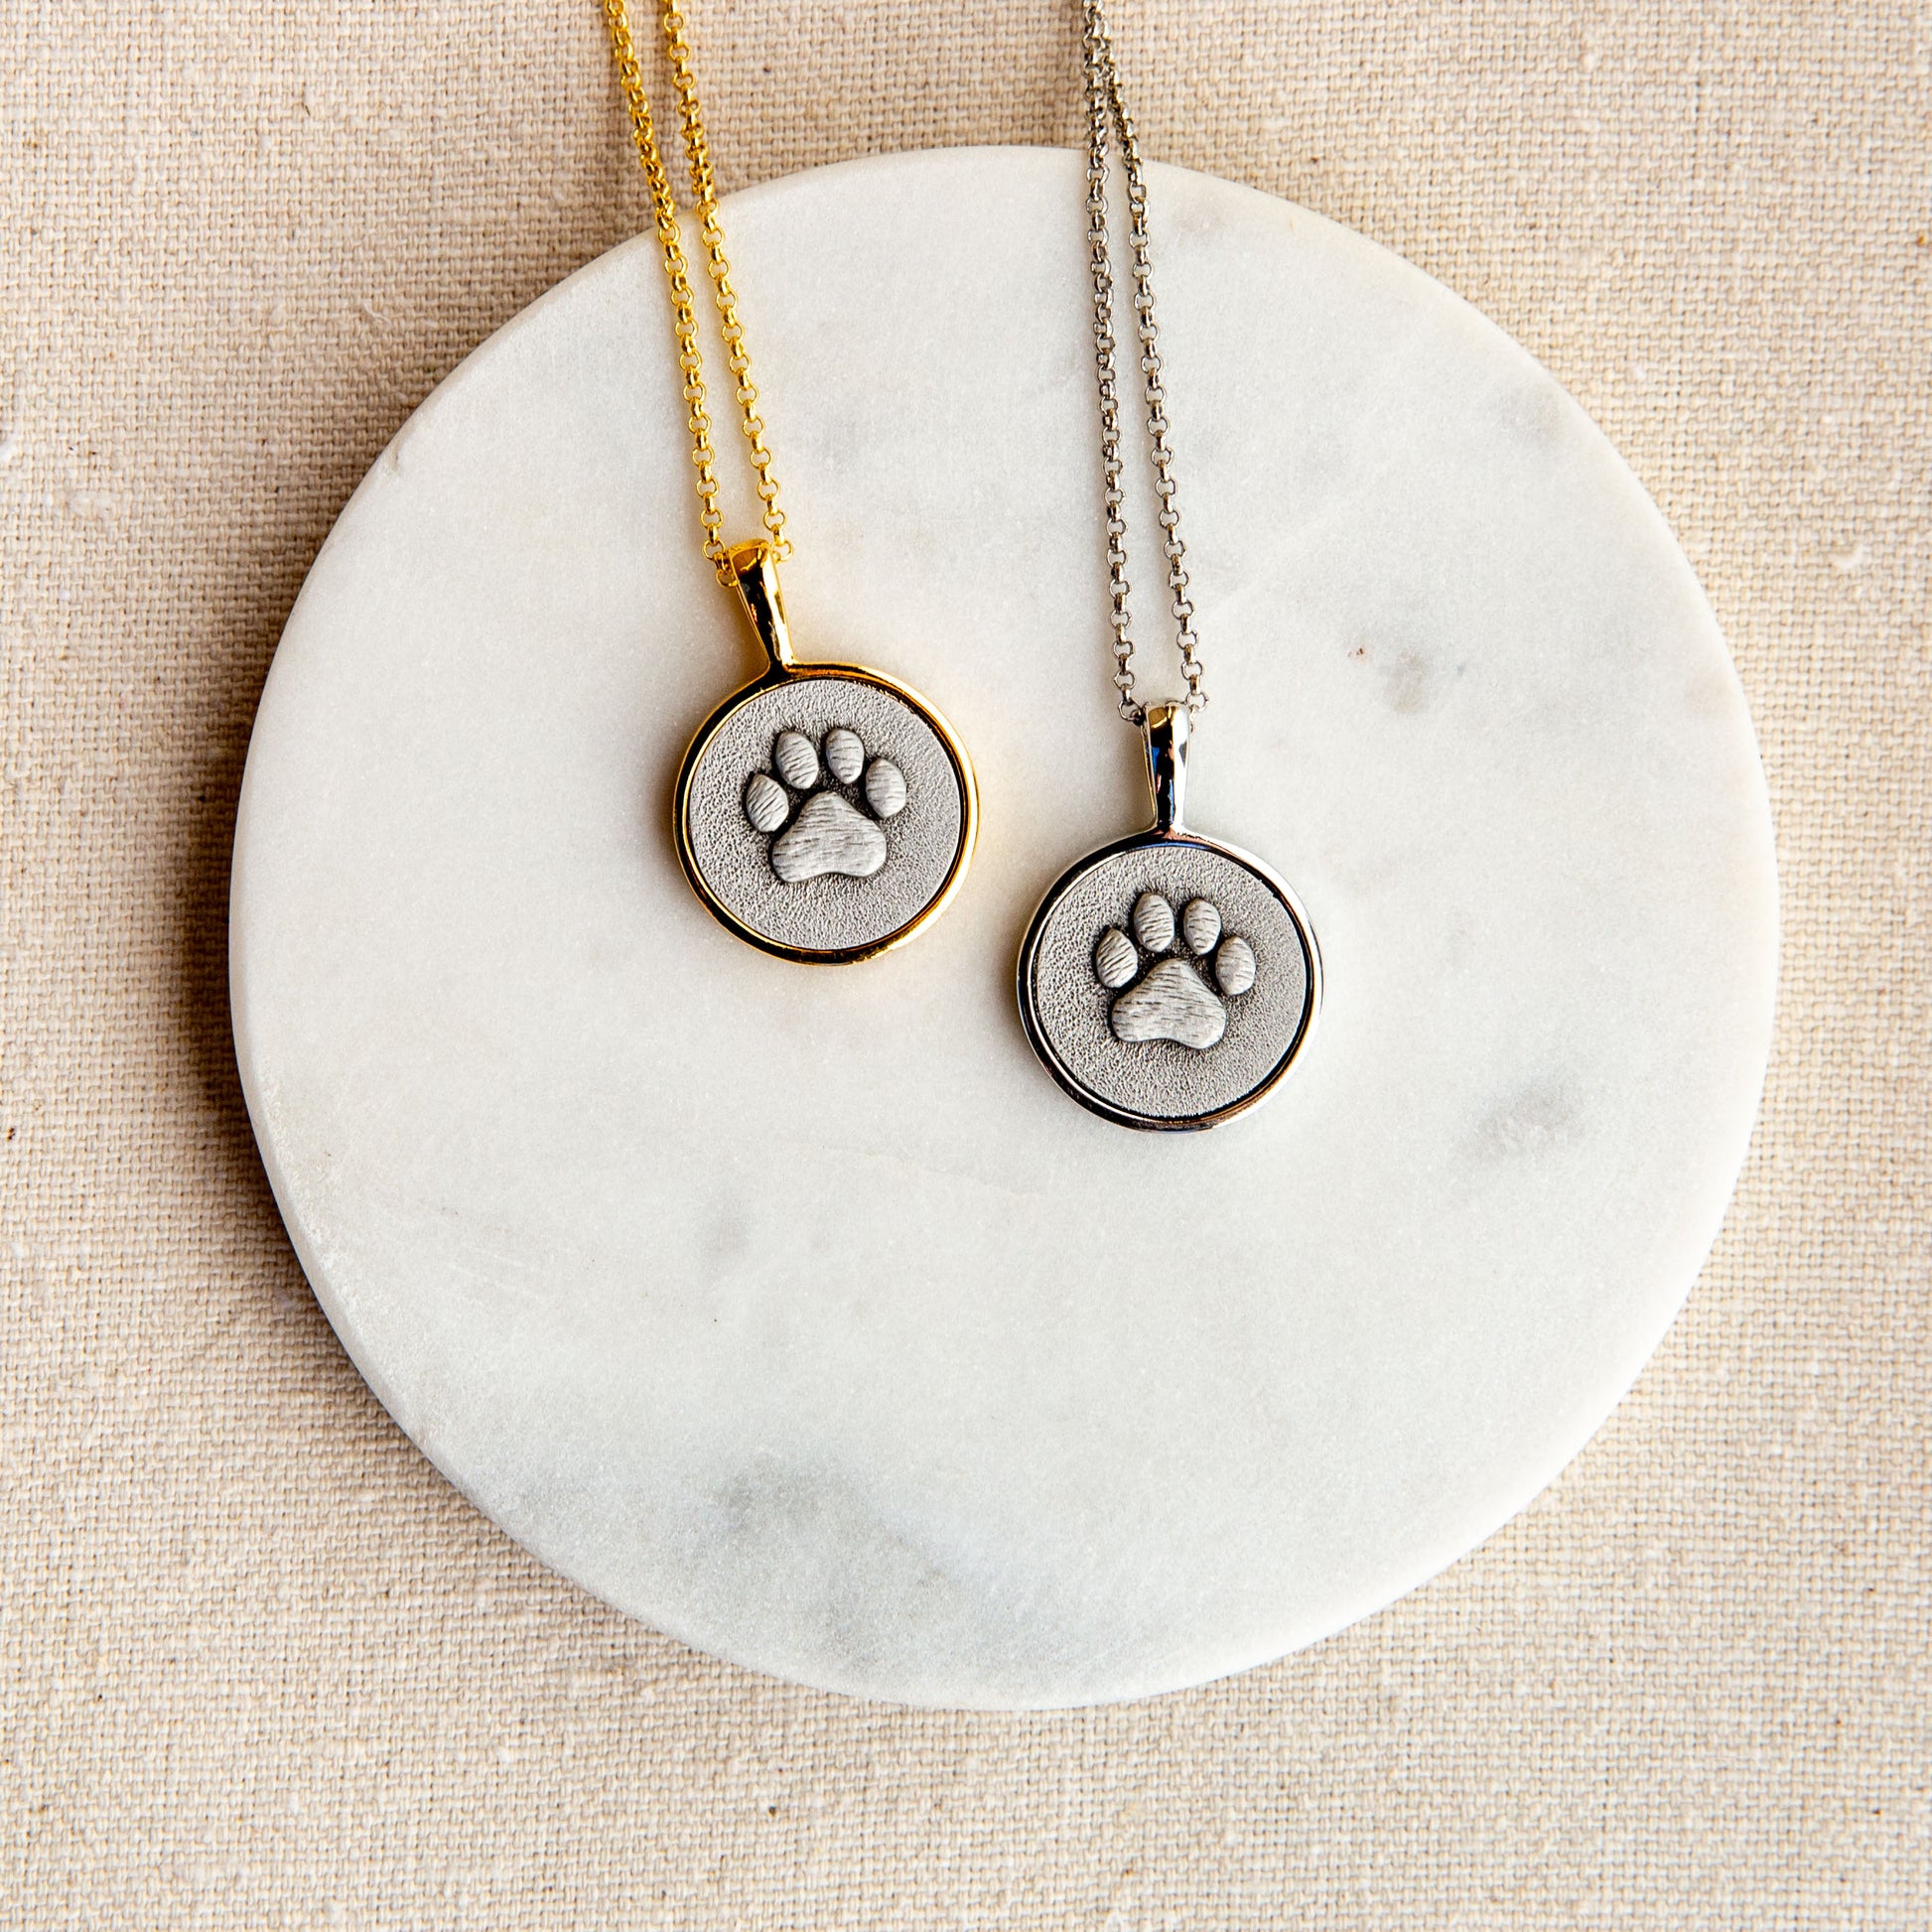 Pawprint Personalized Necklaces - fur mommas for cat or dog lovers